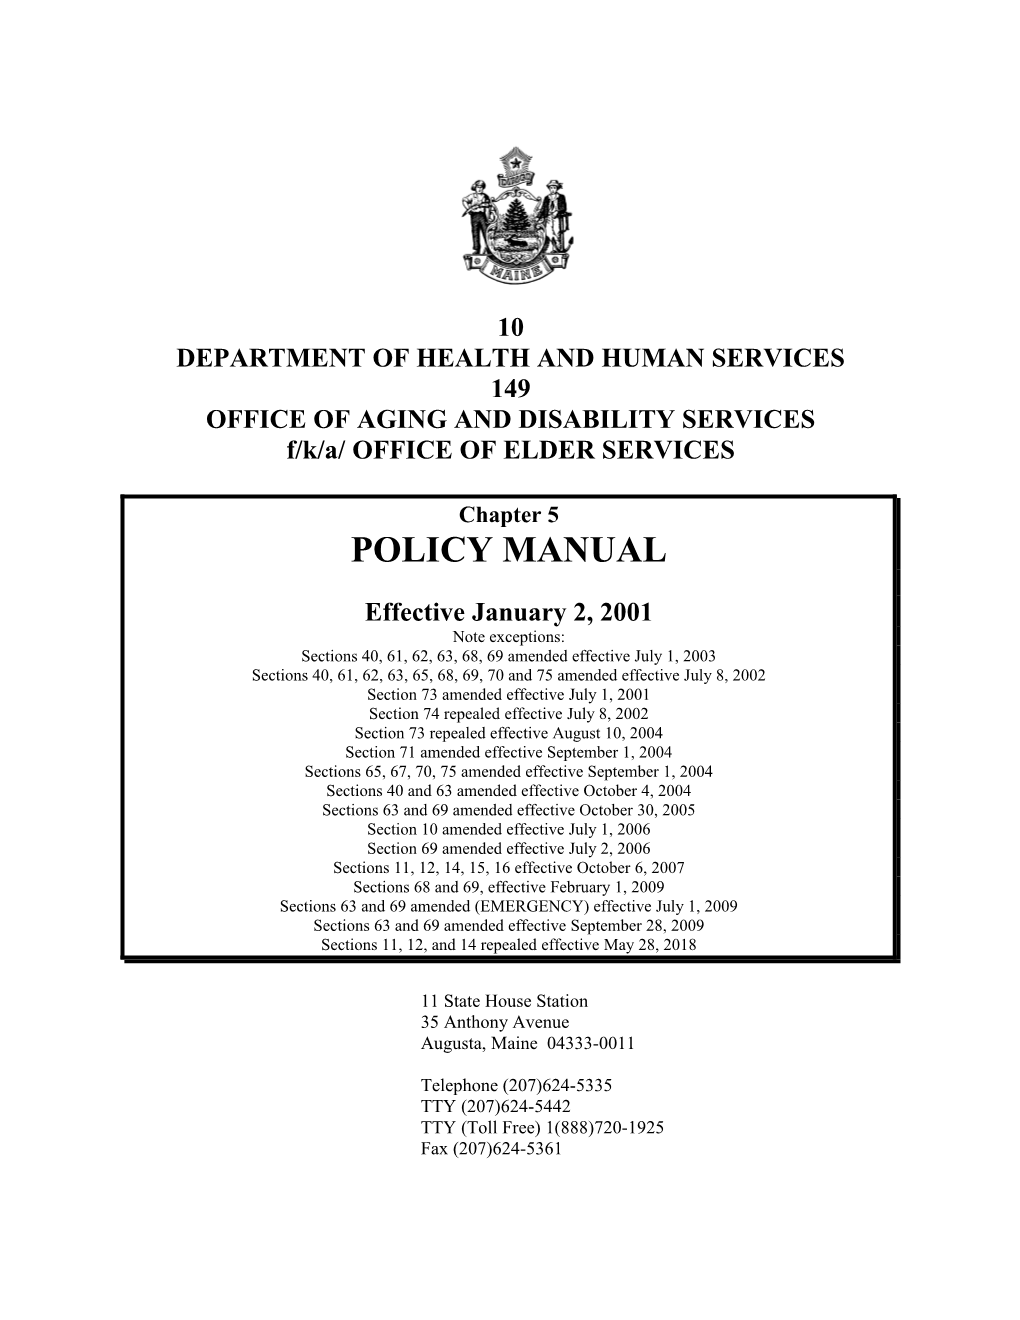 Department of Health and Human Services s37